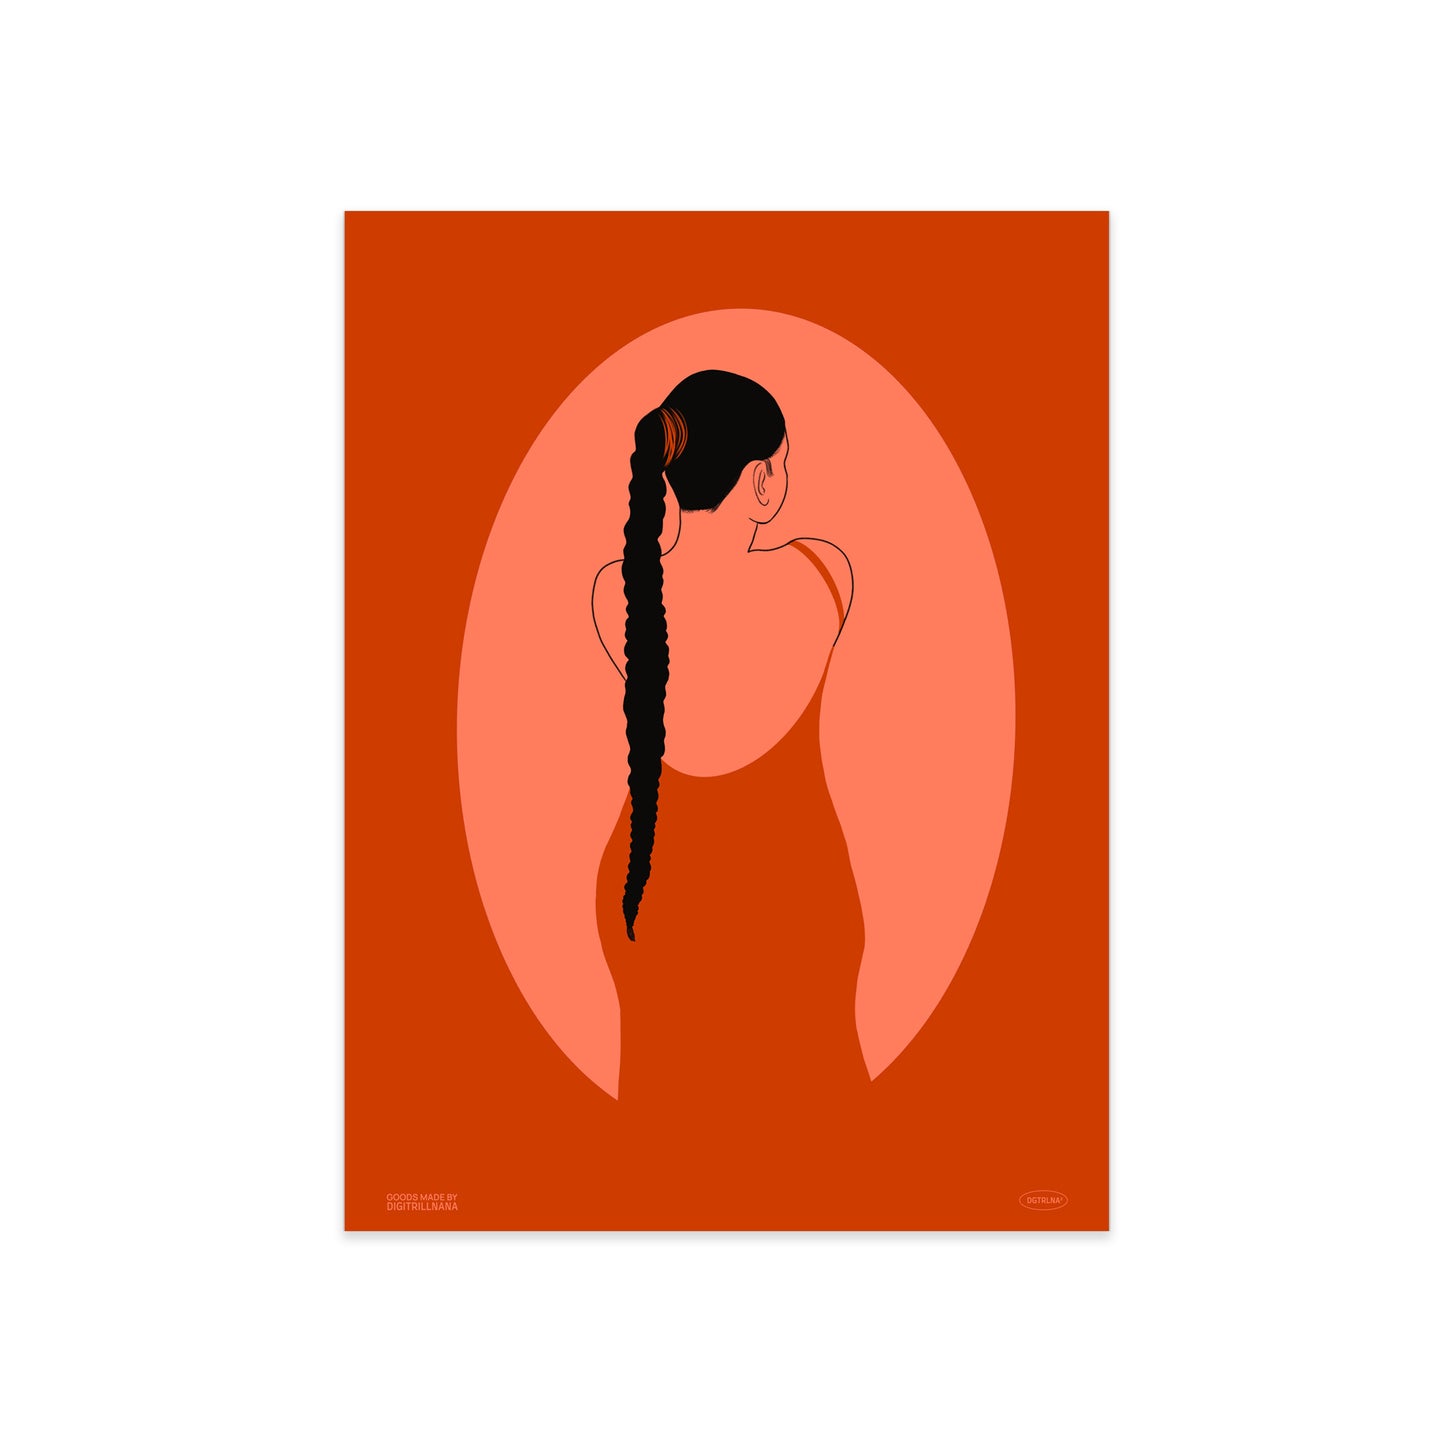 A series of four vibrant monochromatic illustrations of black women figures in the hues orange, blue, and teal. The illustration features a silhouette oval with a women’s figure inside. Light and dark colors create an optical illusion with positive and negative space.  Silhouette 1: Illustration of a orange monochrome silhouette back view of a figure in a low back silk dress with her hair in a long ponytail. 